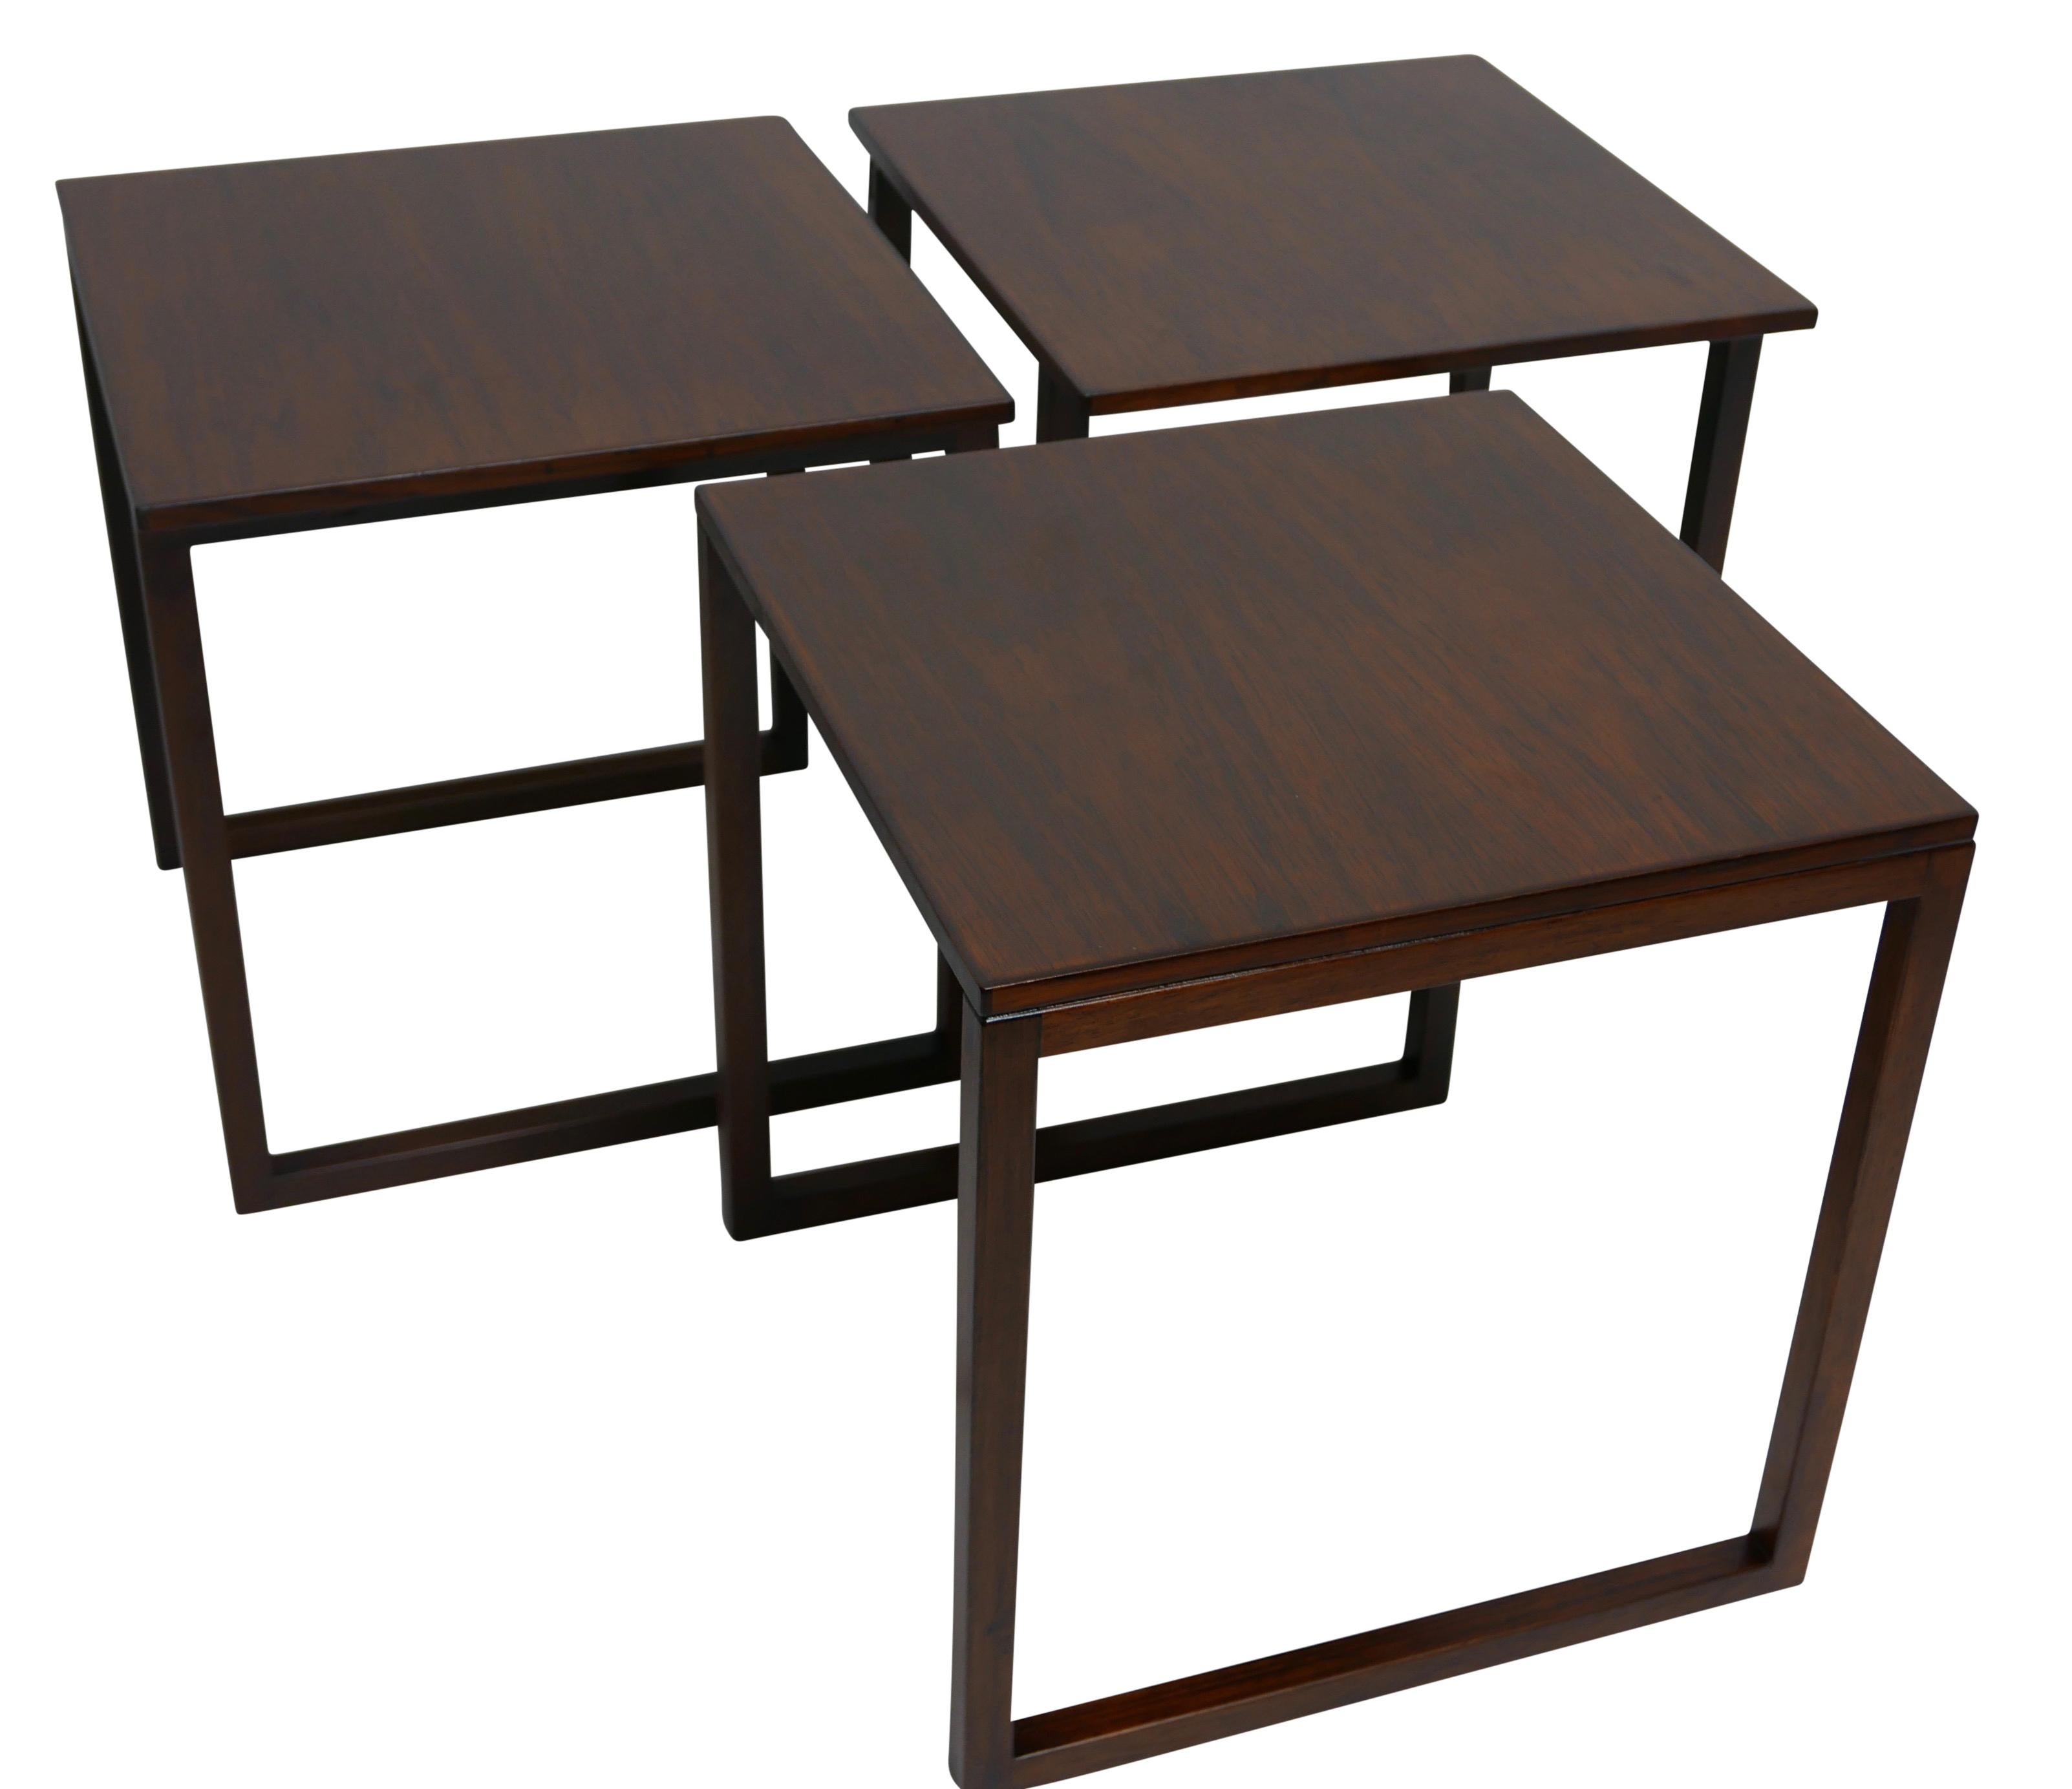 Midcentury Danish Modern Rosewood Nesting Tables, Set of Three For Sale 3